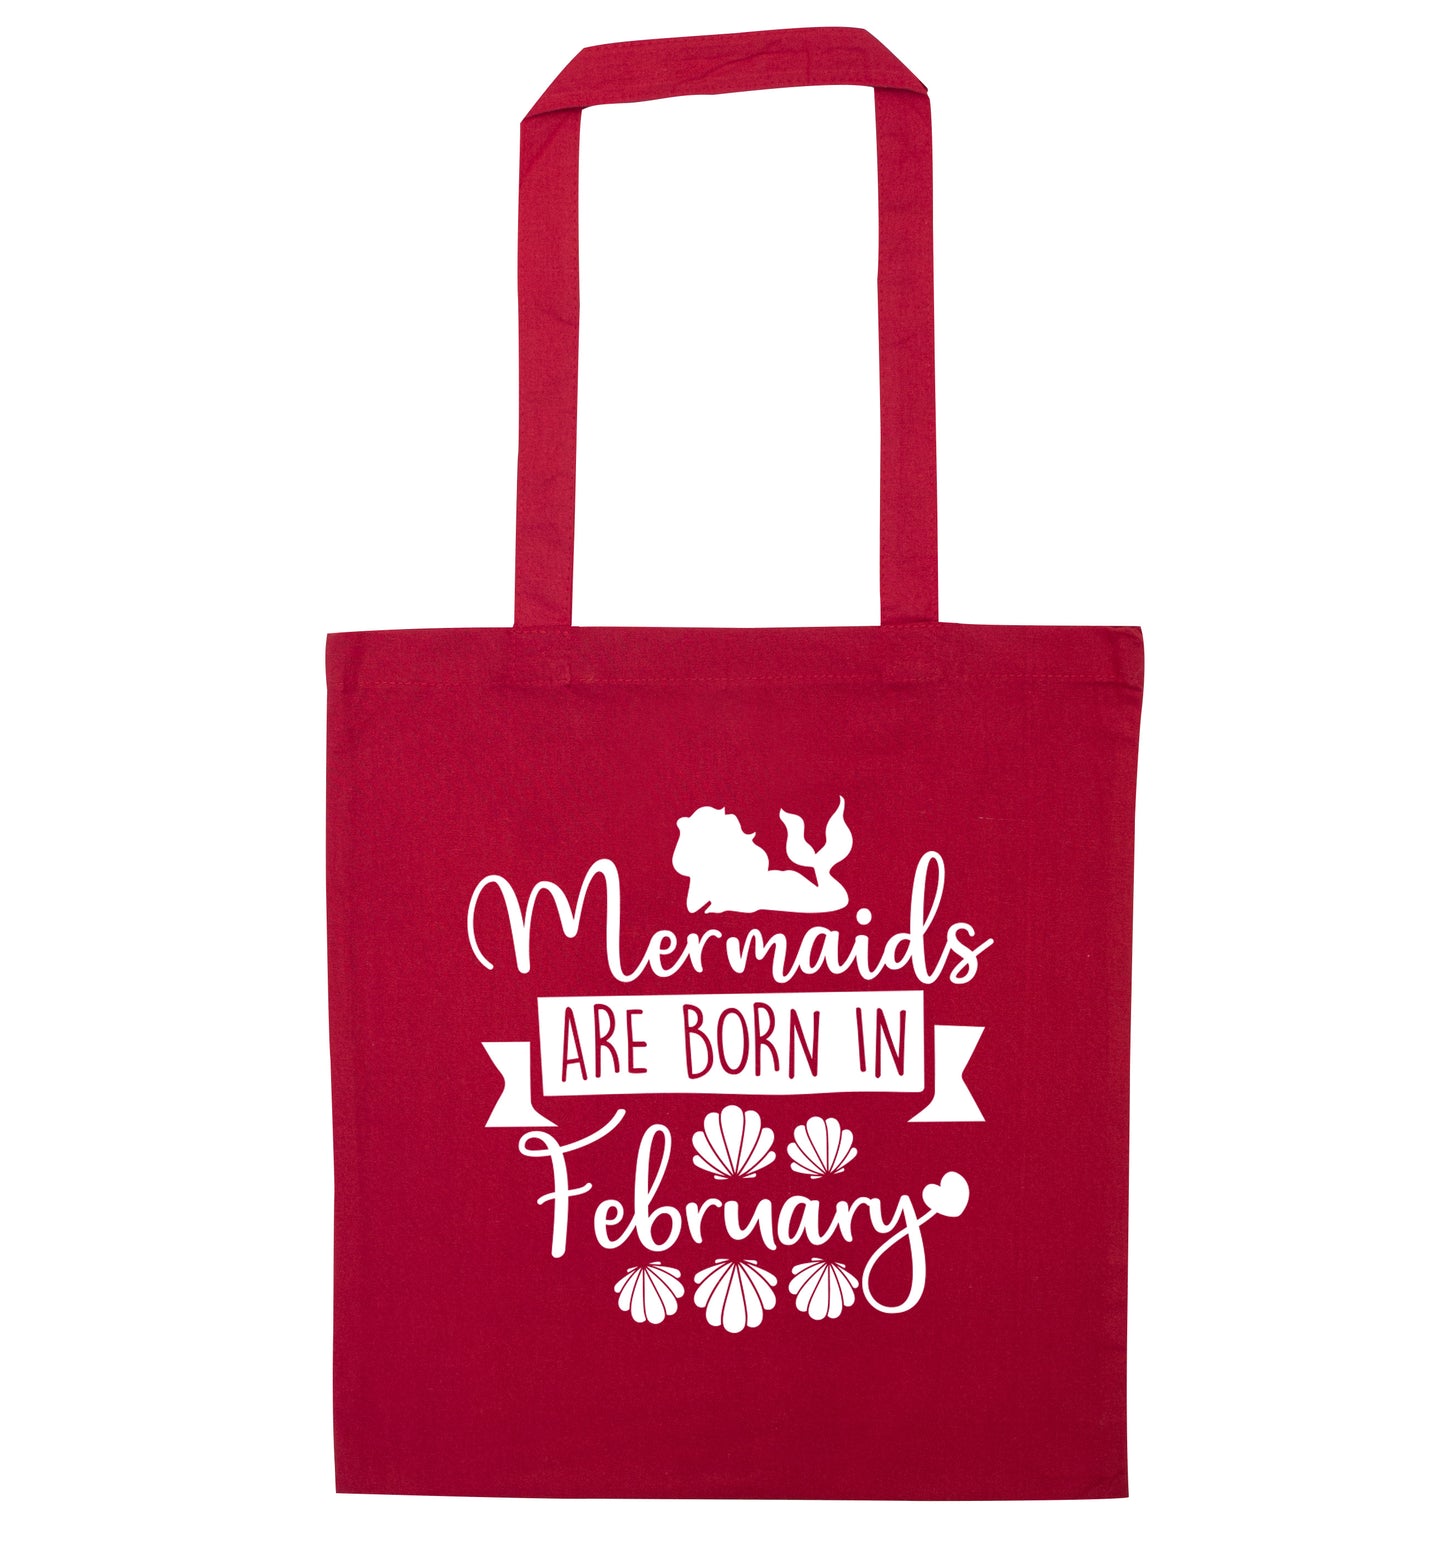 Mermaids are born in February red tote bag